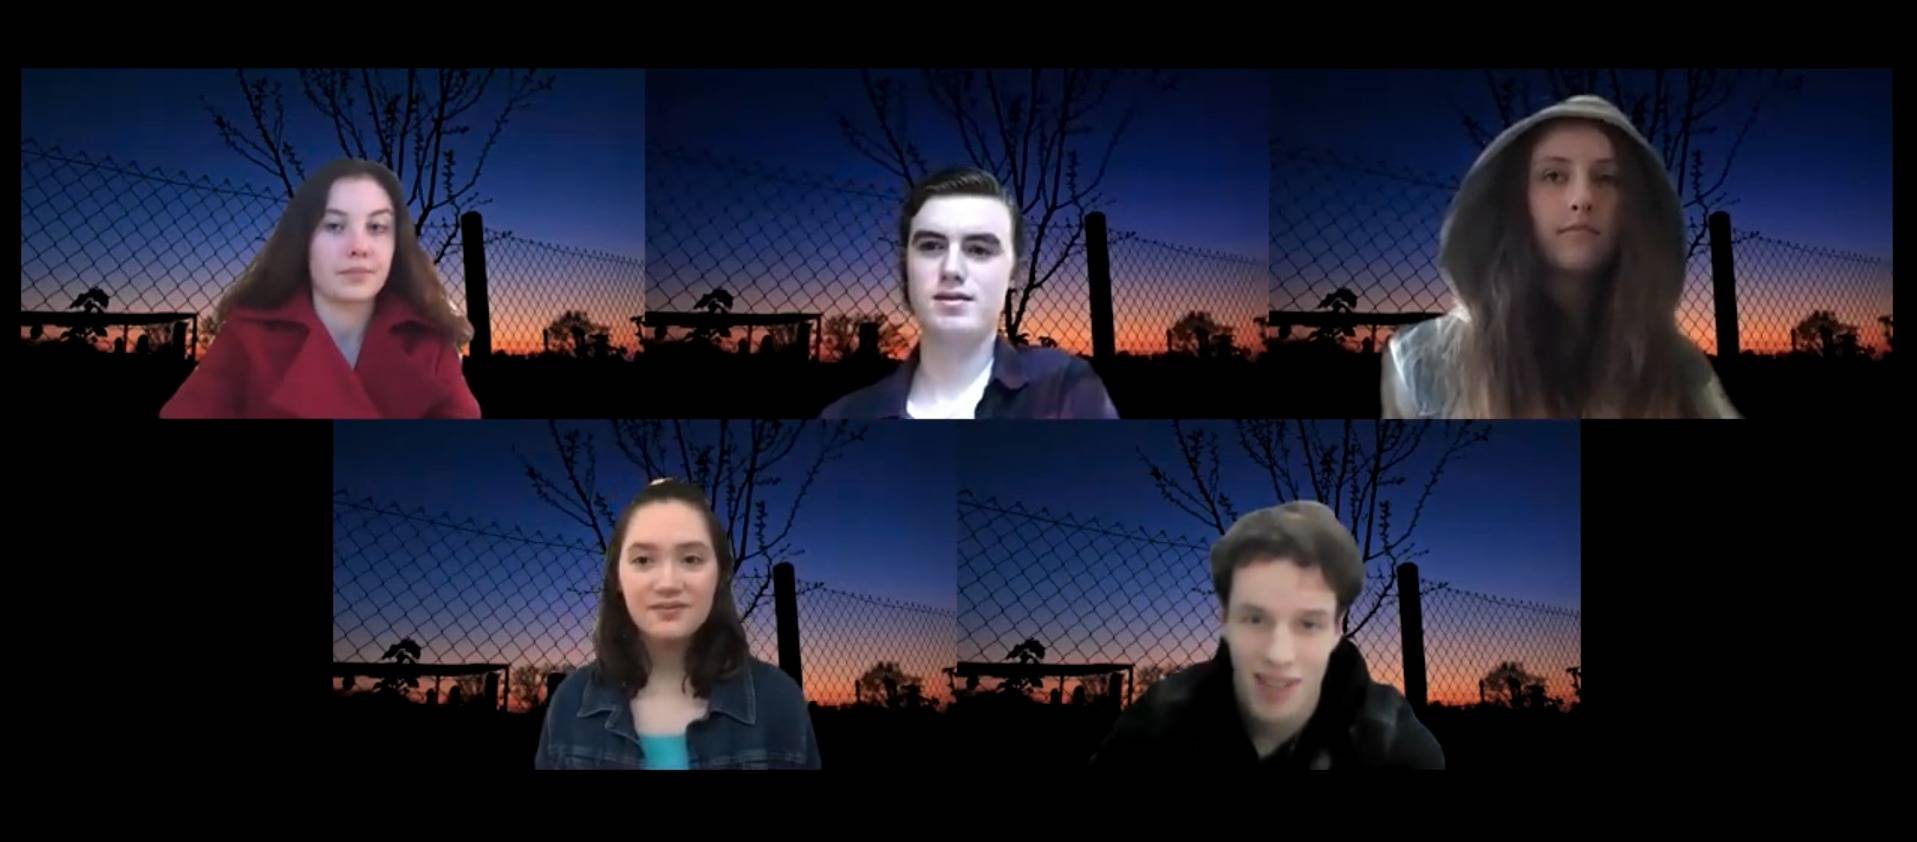 Mercer Island High School Drama Department actors rehearse for “The Outsiders.” Pictured are Catherine Grady, Lucas Vorkoper, Kyra McPherson, Kate Petersen and Jamisen Dowdy. The play will run online Dec. 3-5 and Dec. 10-12. Zoom screen shot